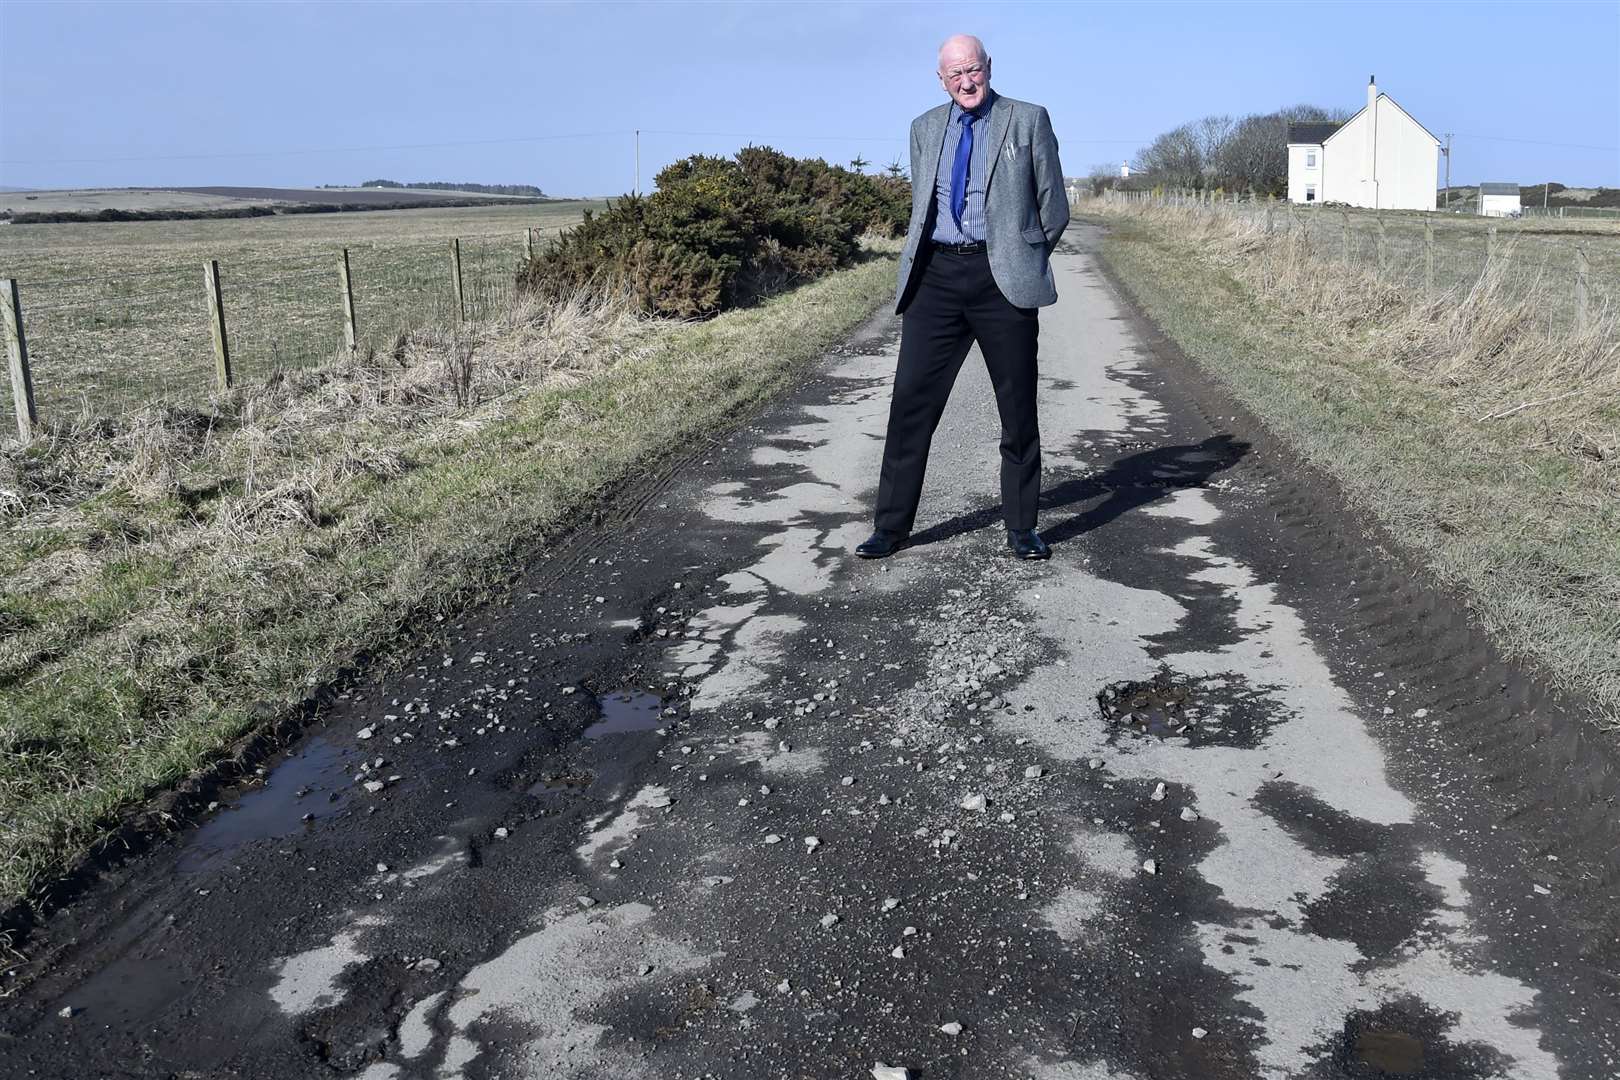 Iain Gregory of the Caithness Roads Recovery group, which has been calling for better investment in road repairs in the far north.